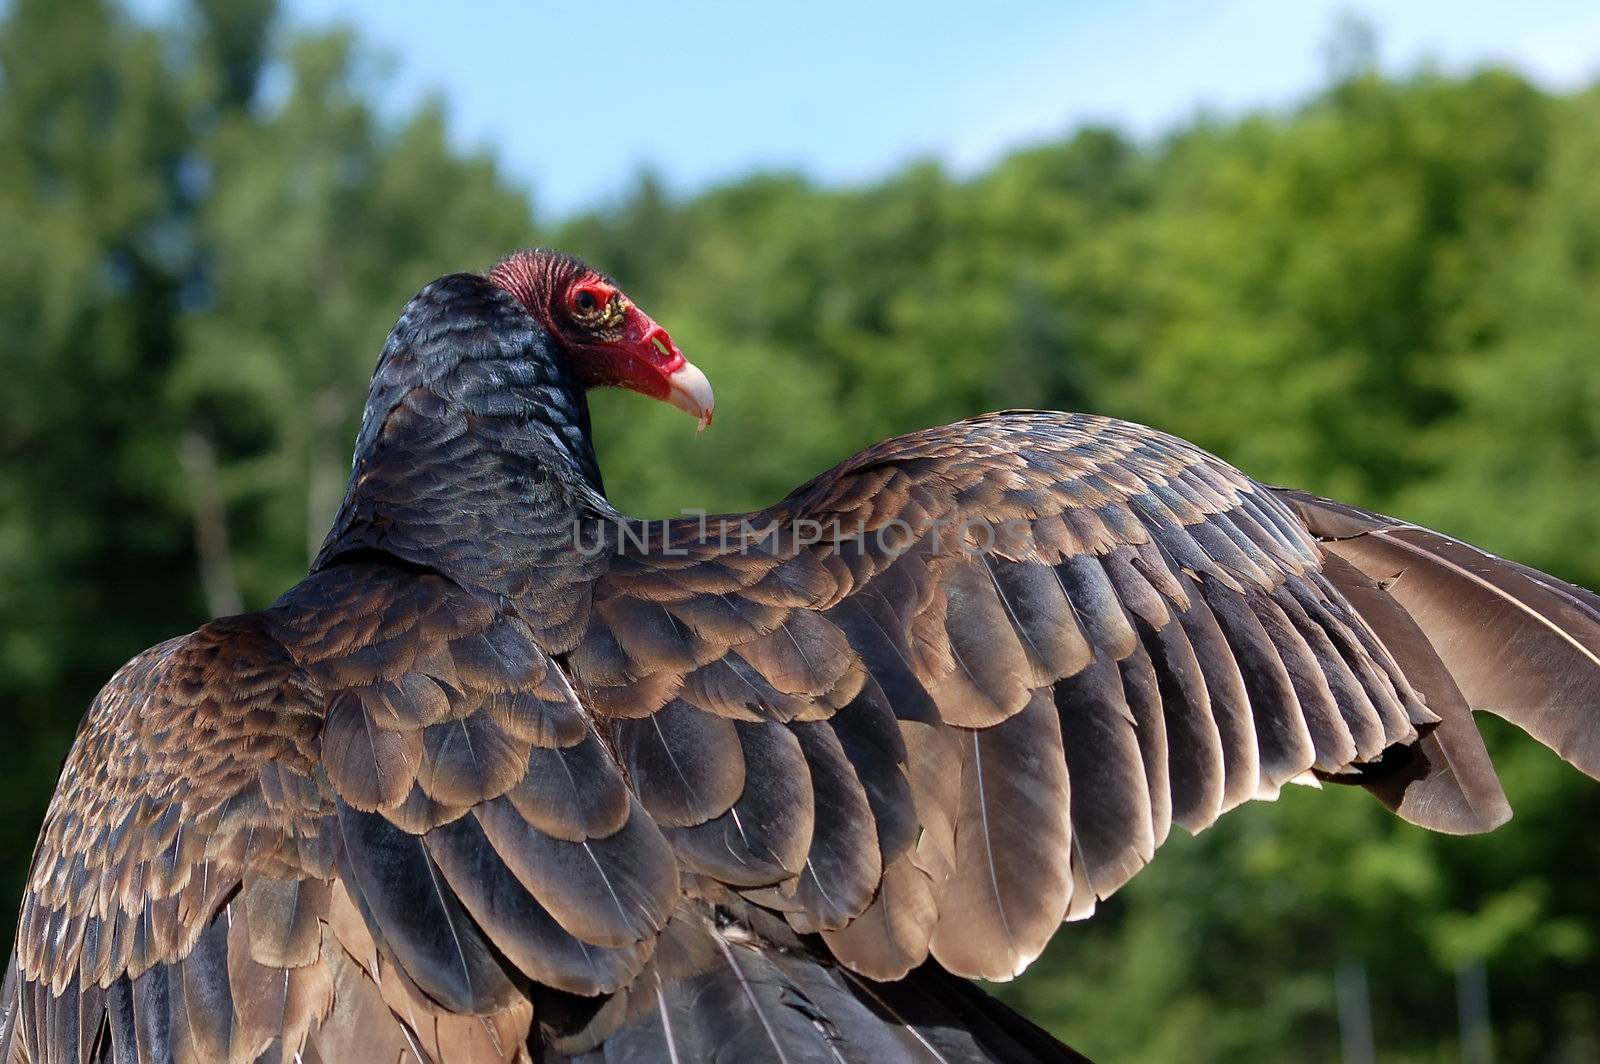 Close-up picture of a Turkey Vulture with it's wing opened